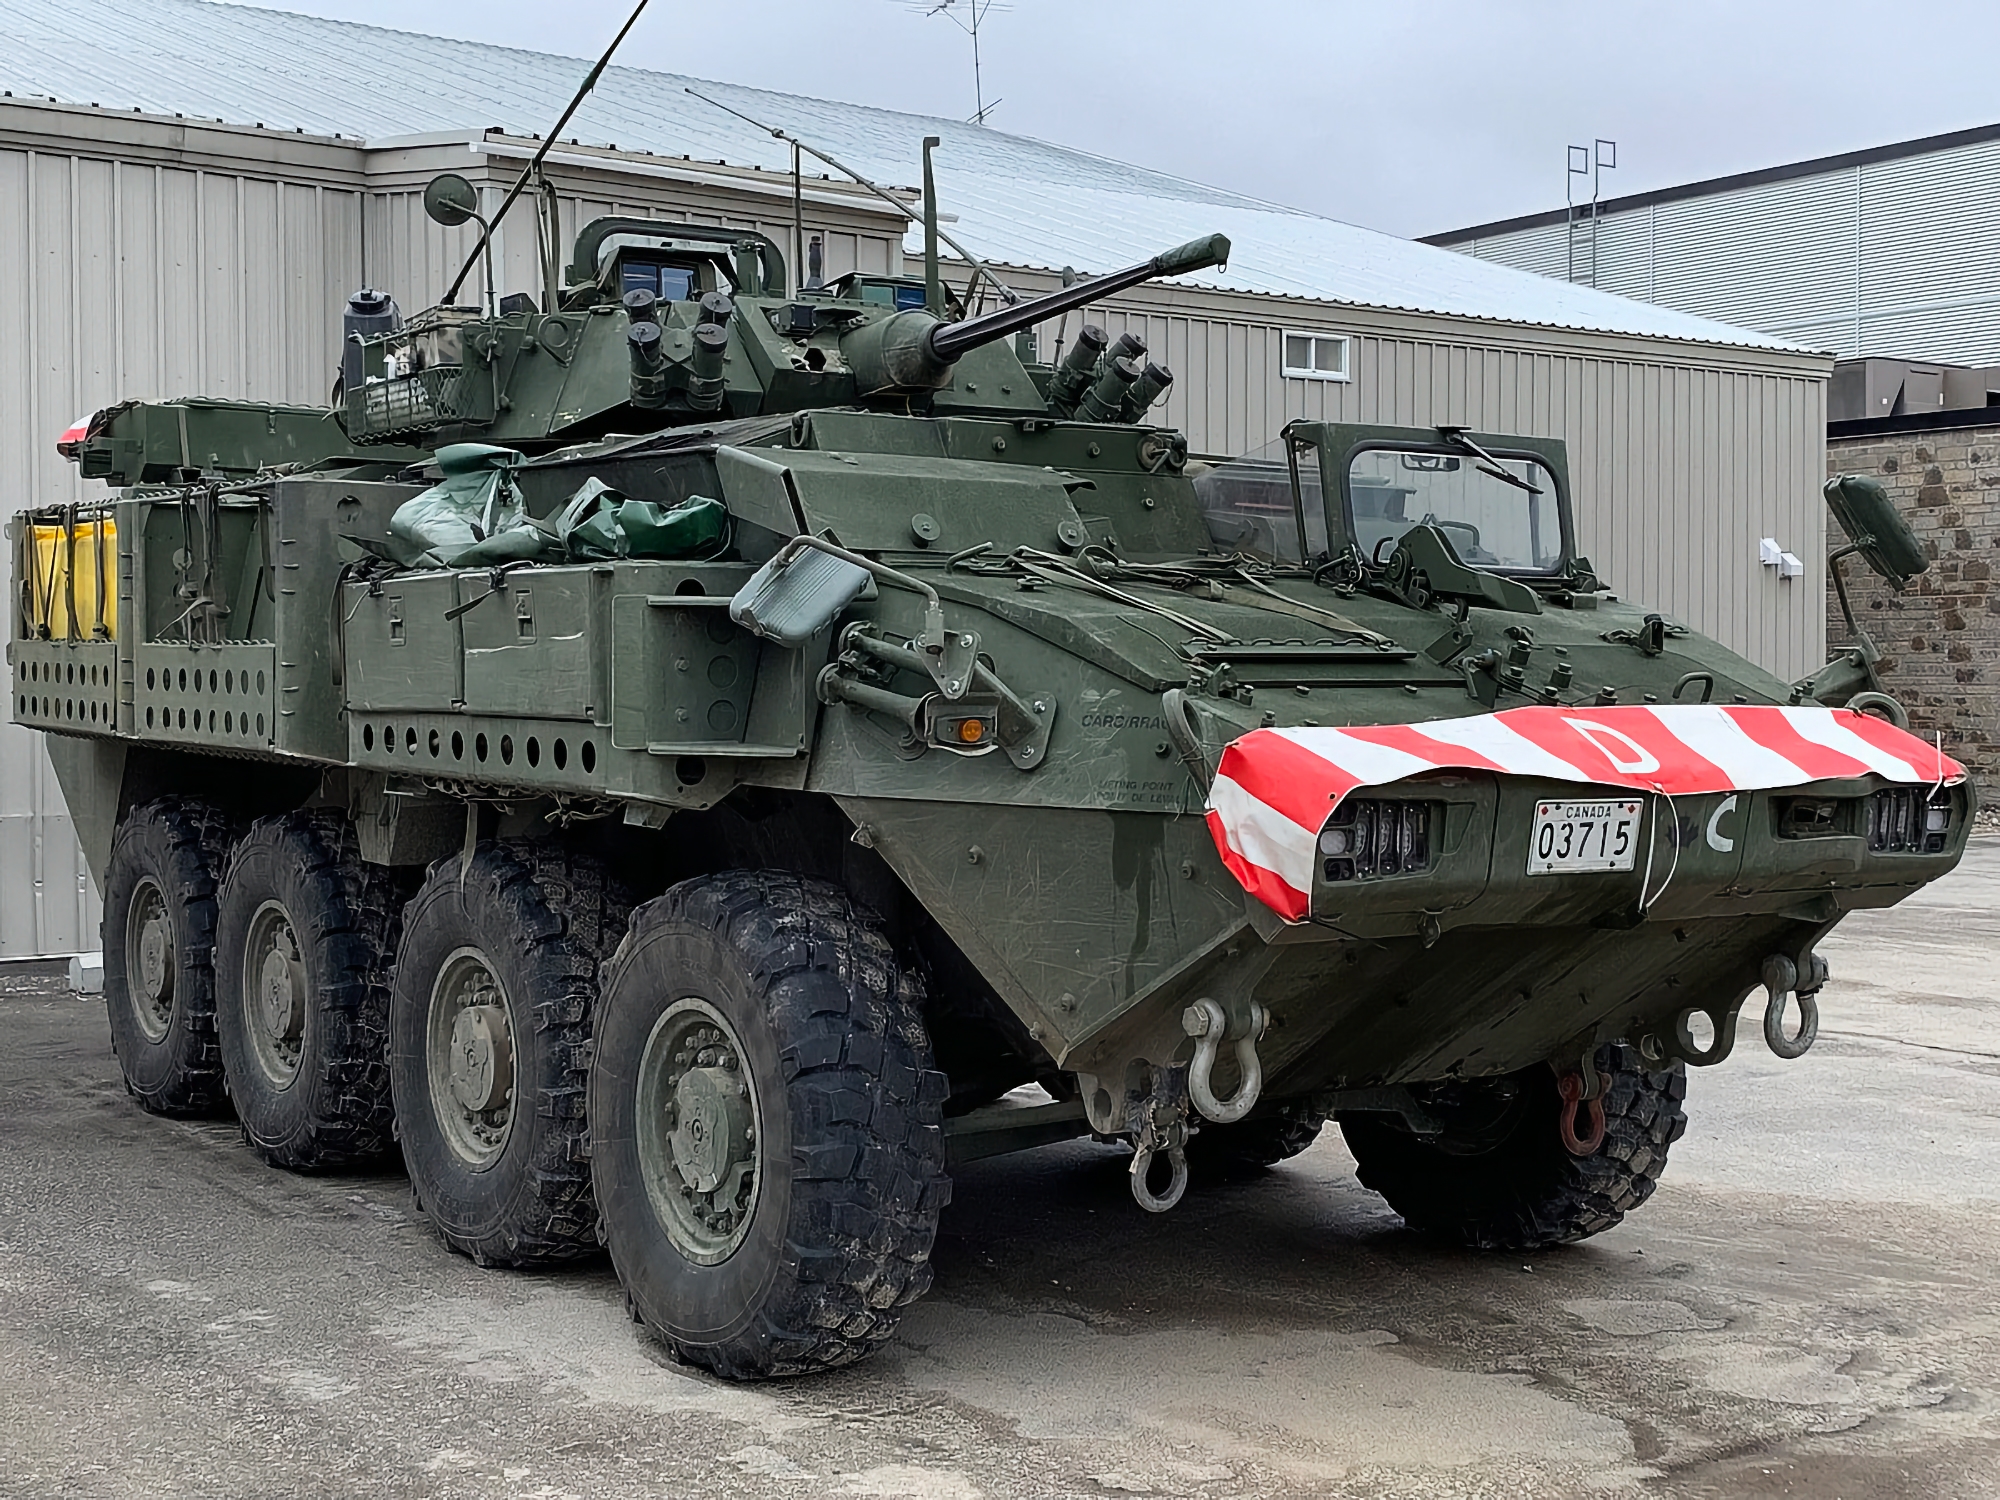 The AFU will receive a new batch of LAV II ACSV Super Bison armoured personnel carriers from Canada in the summer